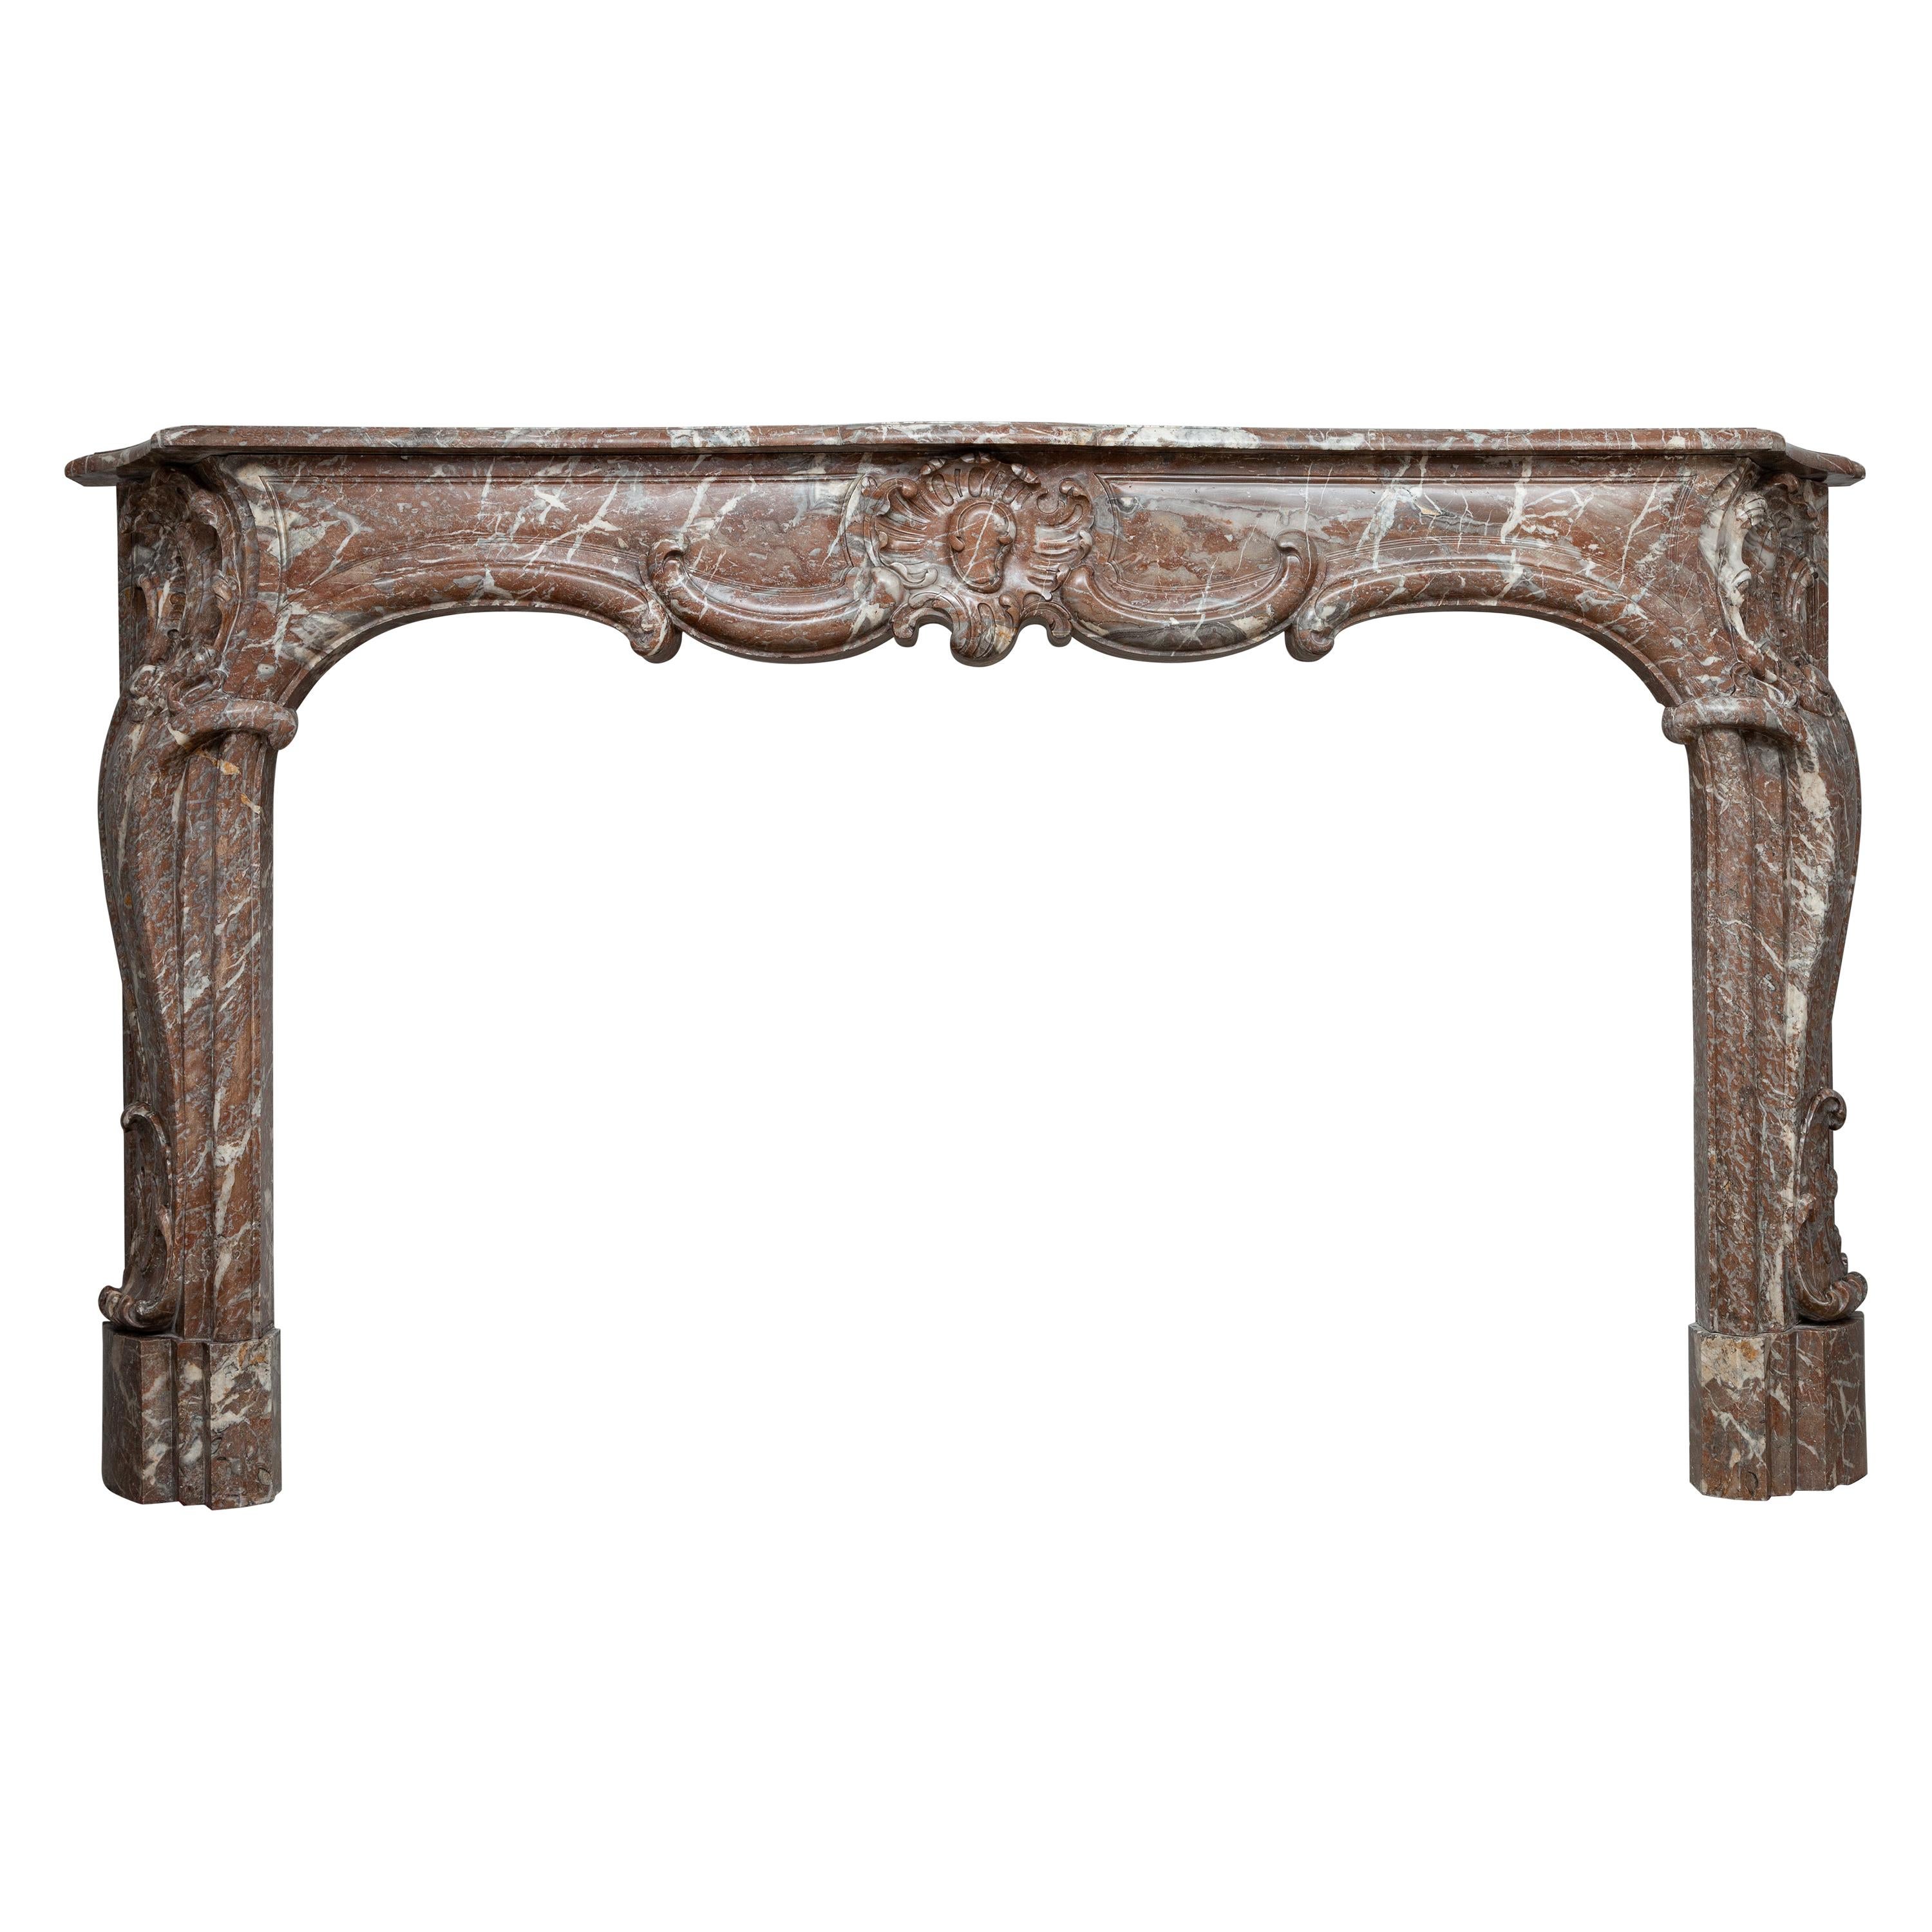 Unique 18th Century Rococo Style Marble Antique Fireplace For Sale